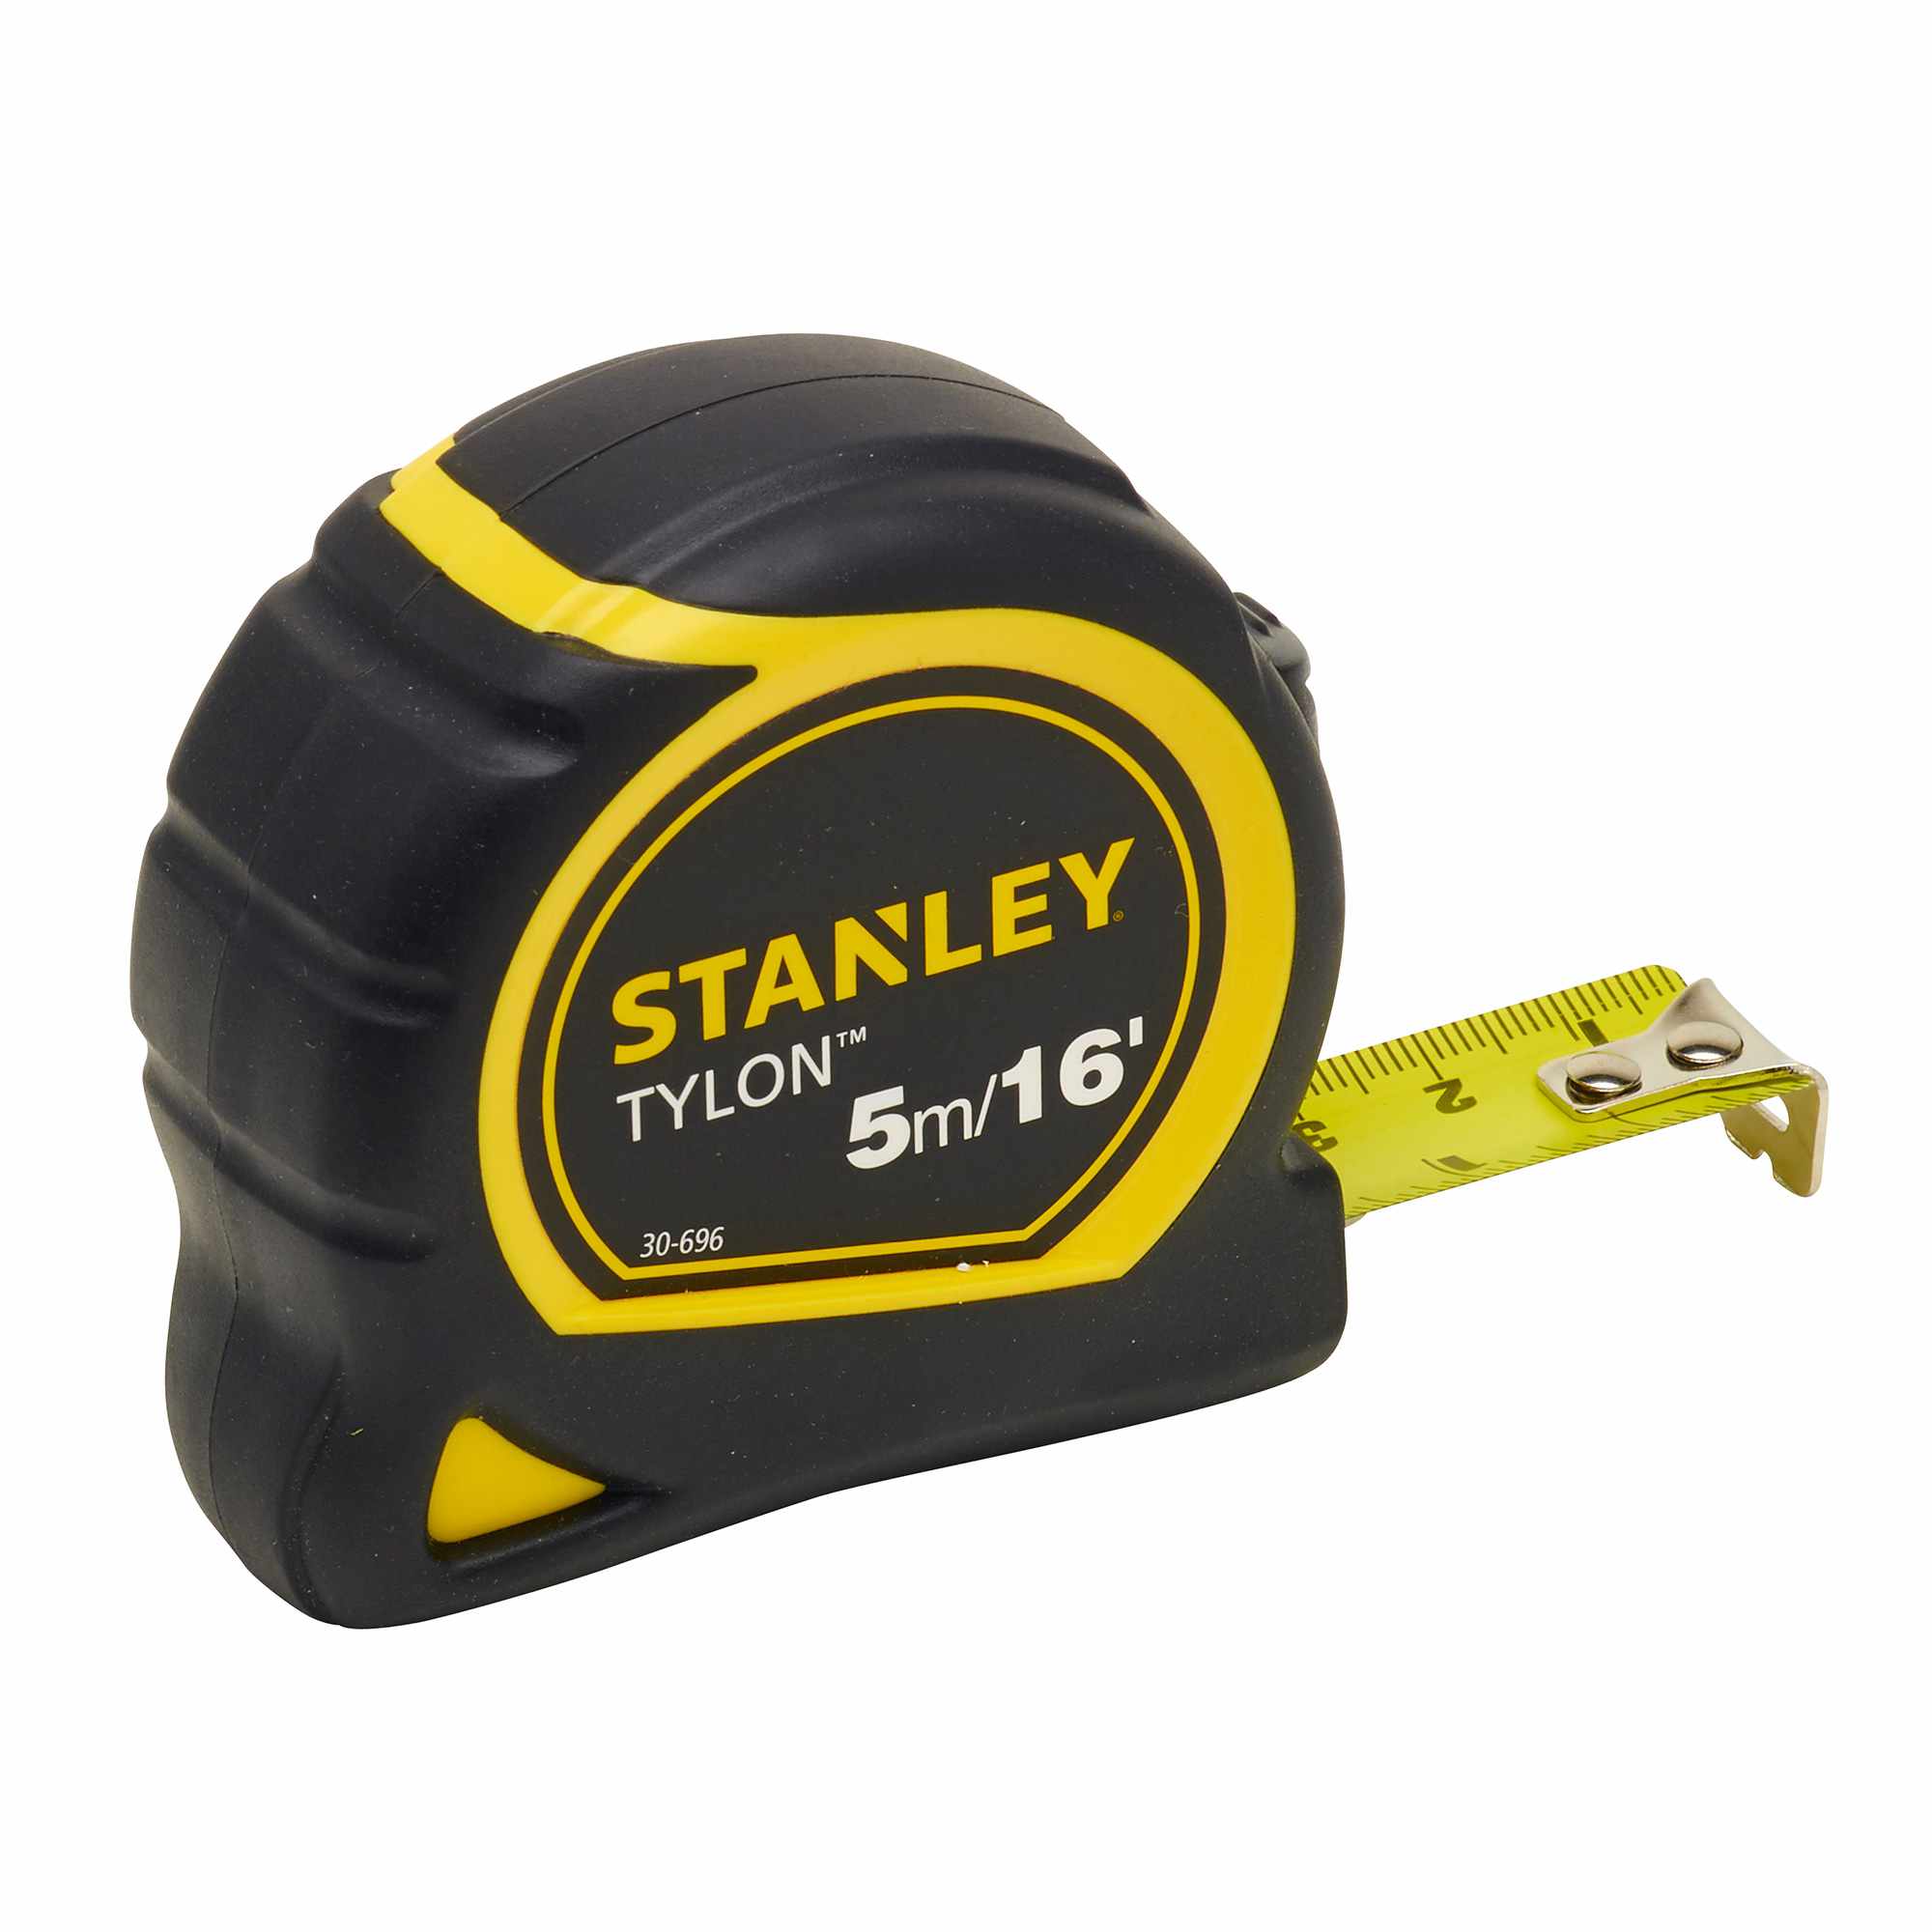 STANLEY FMHT1-33856 2M Fatmax Tape Measure With Keychain (36 pcs.)